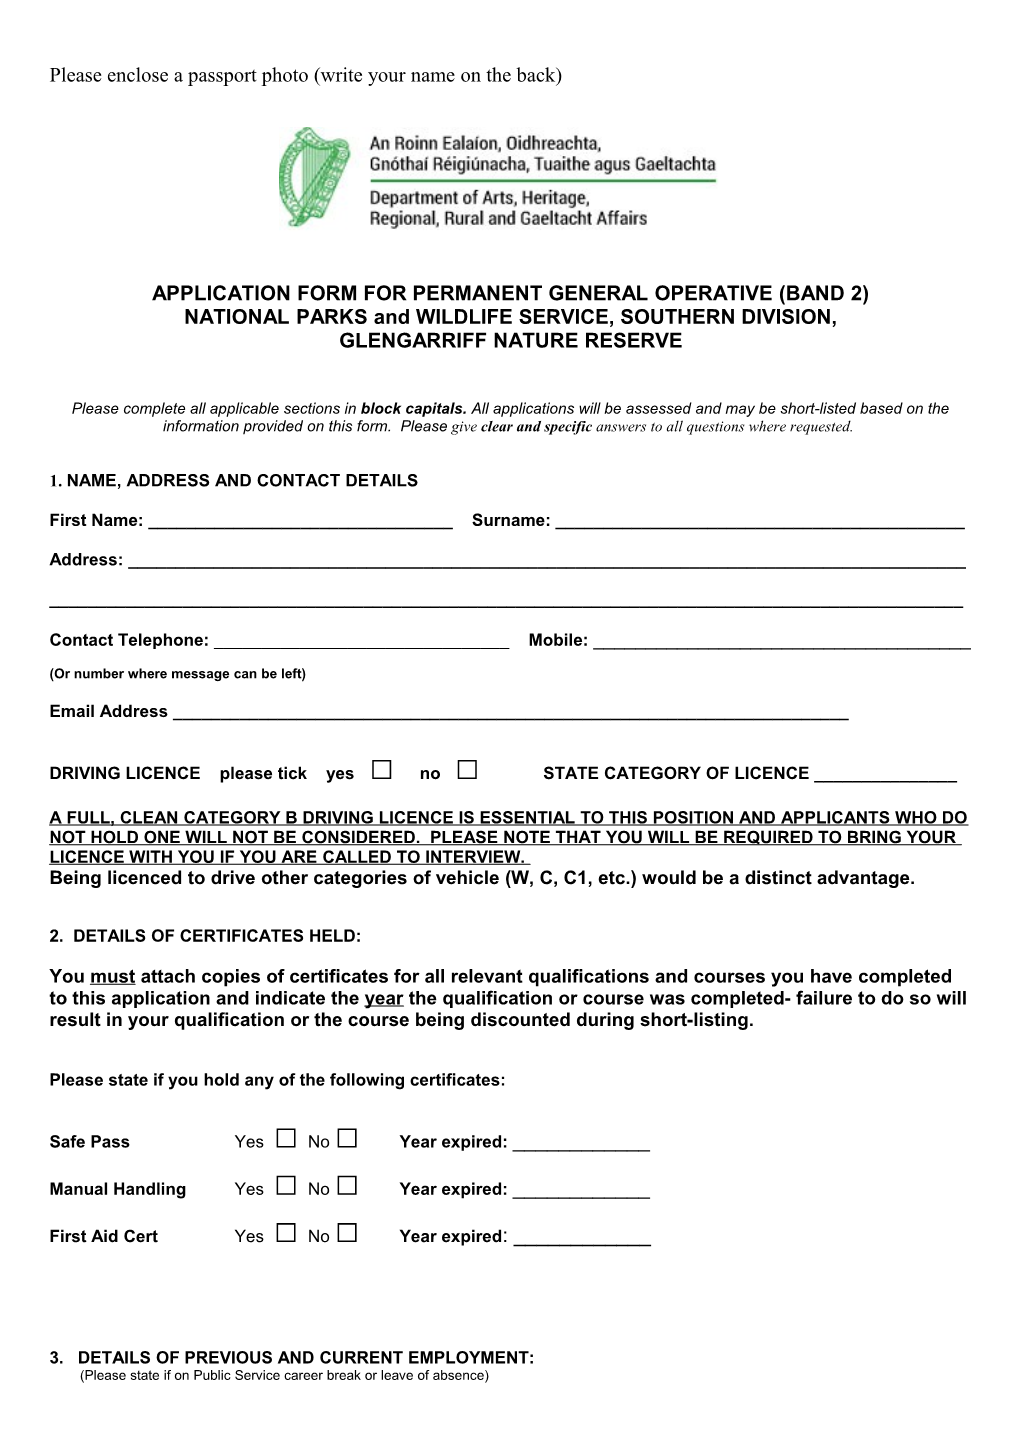 Application Form for Permanent General Operative(Band 2)